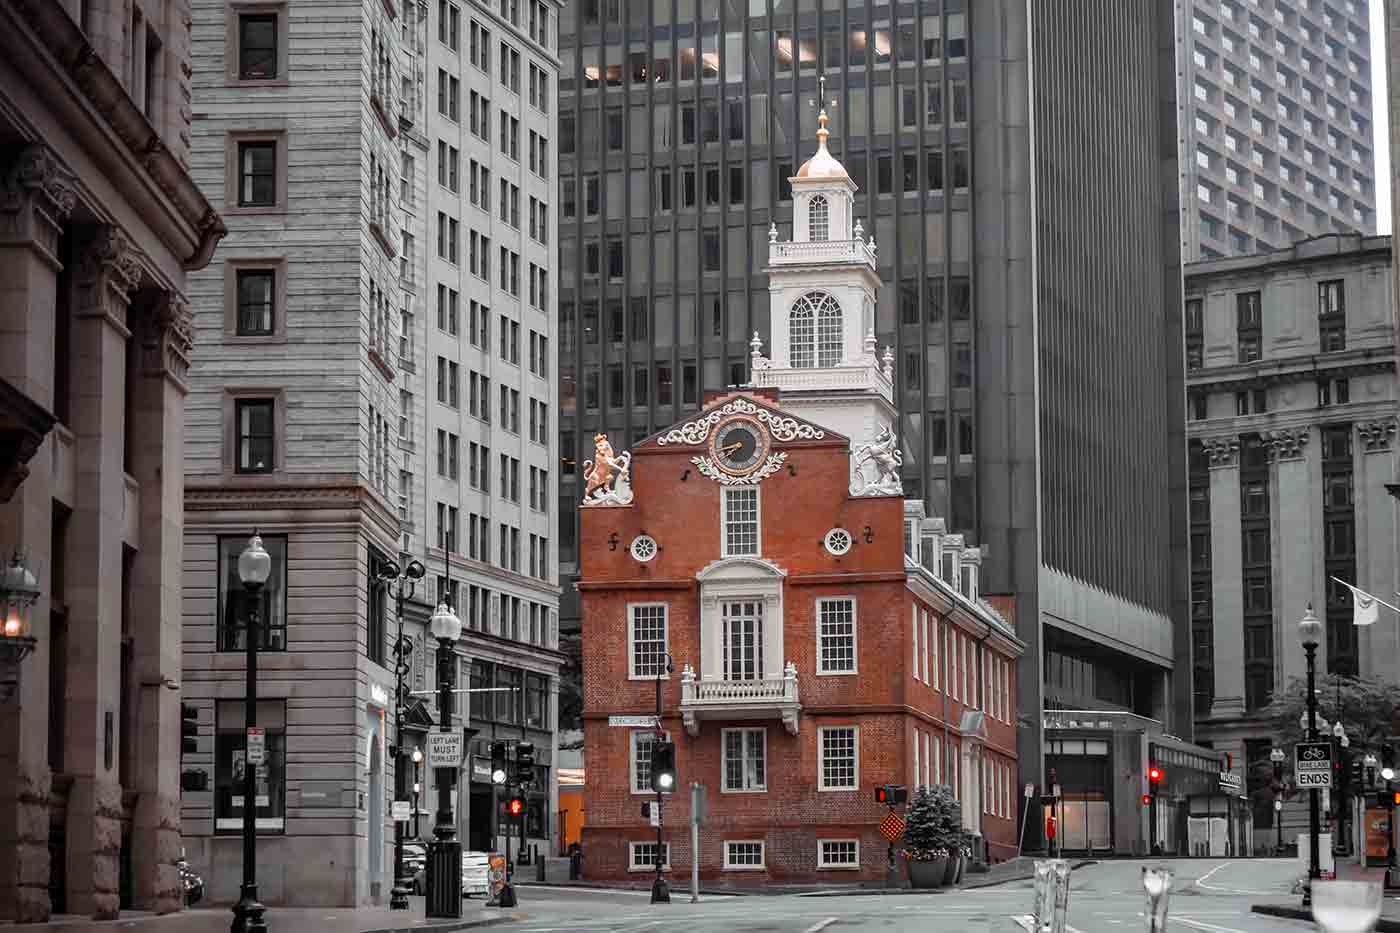 Old State House Museum